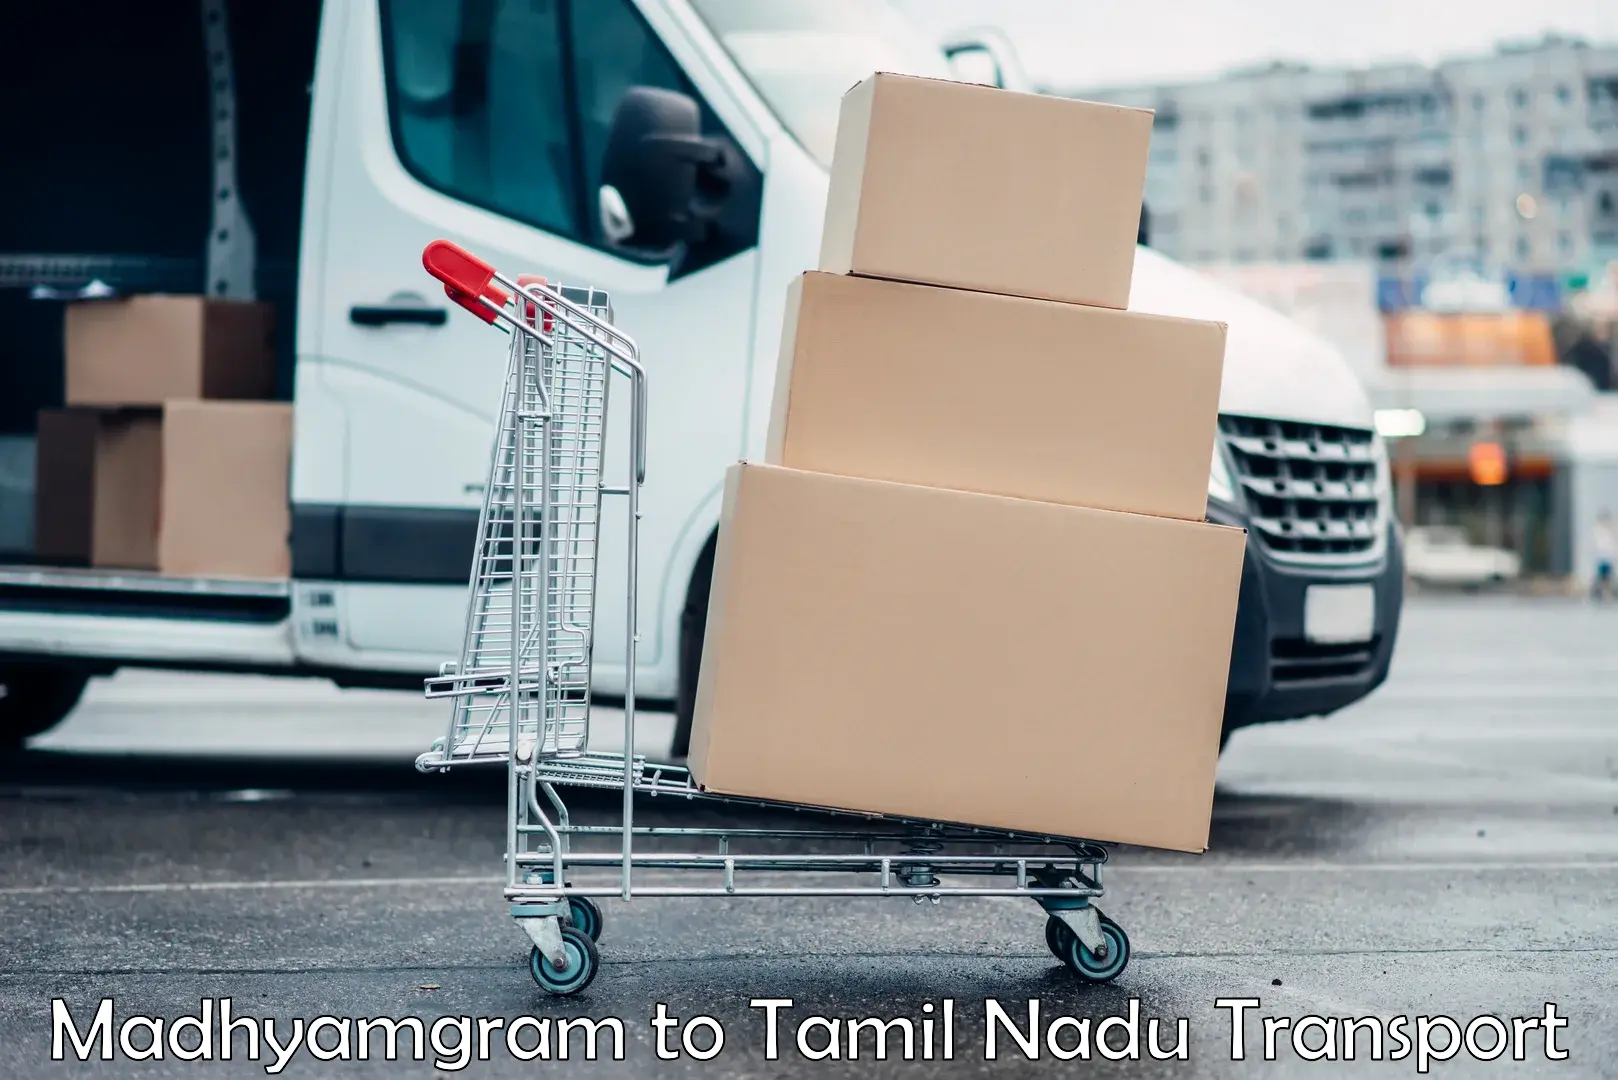 Delivery service Madhyamgram to Tuticorin Port